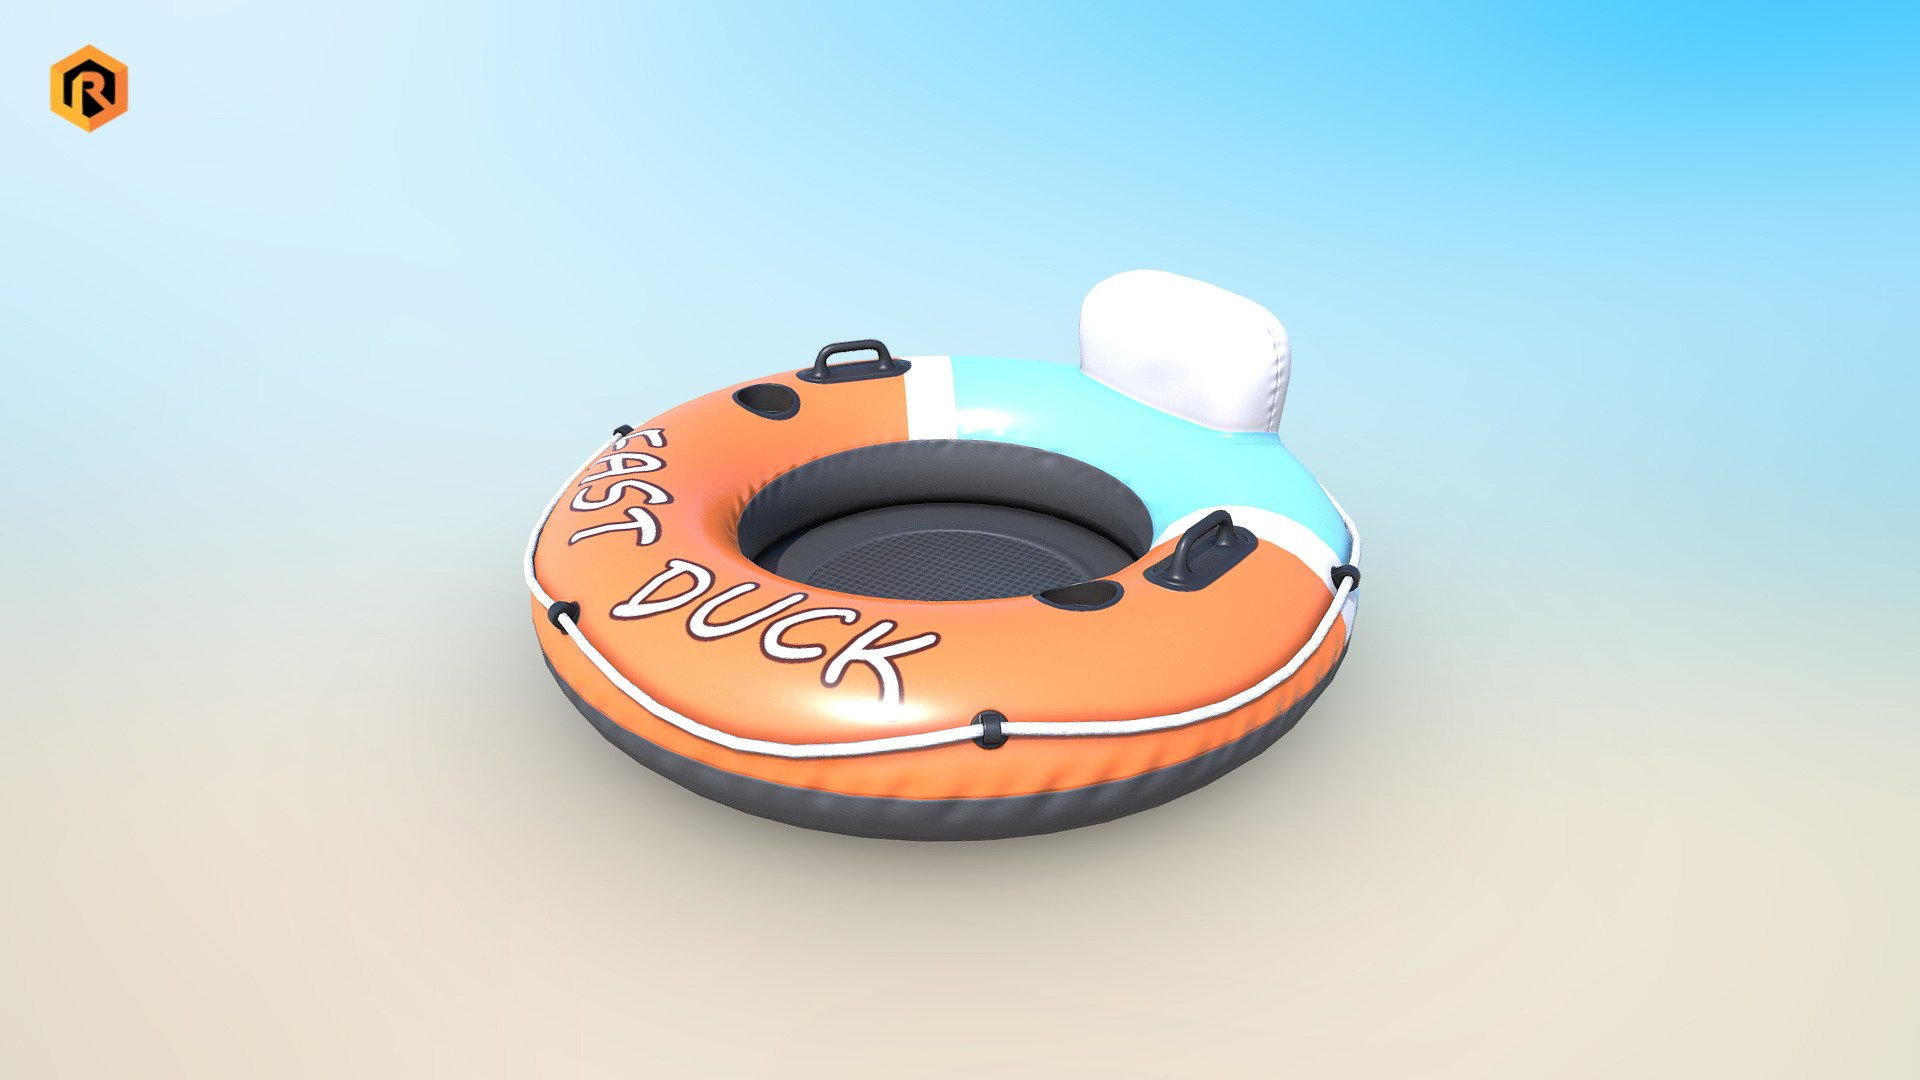 High quality low-poly 3D model of Inflatable Wheel Beach Toy with backrest. 

Comfortable wheel will ensure blissful relaxation while relaxing by the water :)

This 3D model is best for use in games and other VR / AR, real-time applications such as Unity or Unreal Engine.

It can also be rendered in Blender (ex Cycles) or Vray as the model is equipped with all required PBR textures.

Model is built with great attention to details and realistic proportions with correct geometry. 
We have made every effort to ensure these textures are as detailed as possible and made with the greatest care.

Models Info:

- PBR BeachToy texture set 4096 (Albedo, Metallic, Smoothness, Normal, AO)

- 4450 Triangles

- 2809  Vertices

- Model is one mesh

- Model completely unwrapped

- Model is fully textured with all materials applied

- Pivot points are correctly placed to suit animation process

- Model scaled to approximate real world size
- All nodes, materials and textures are appropriately named - Inflatable Wheel Beach Toy - Buy Royalty Free 3D model by Rescue3D Assets (@rescue3d) 3d model